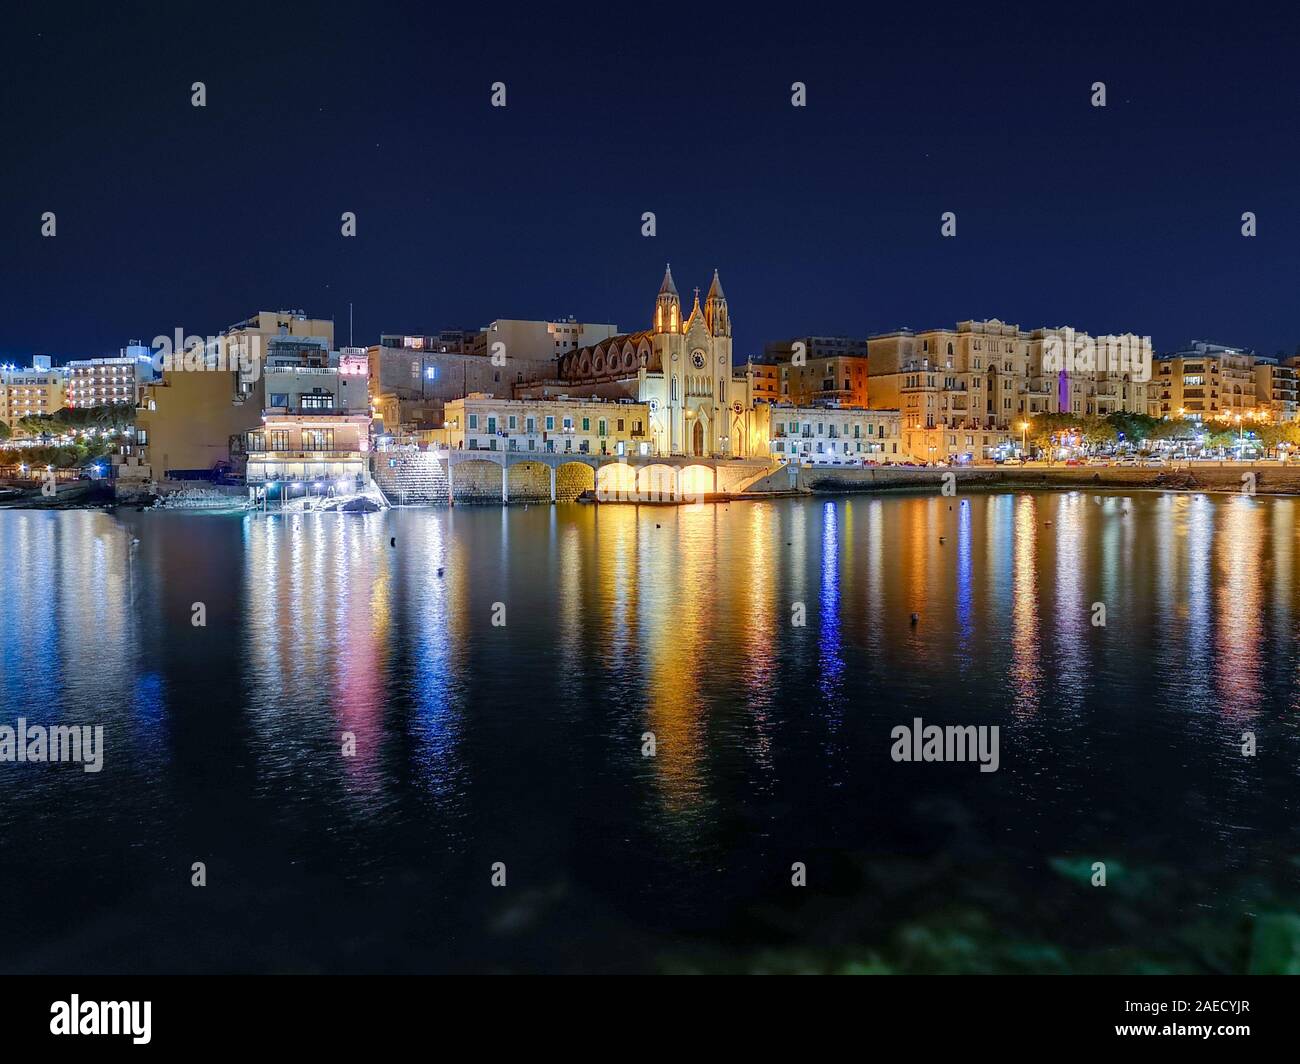 Church of Our Lady of Mount Carmel at night, St.Julians, Malta, Europe Stock Photo